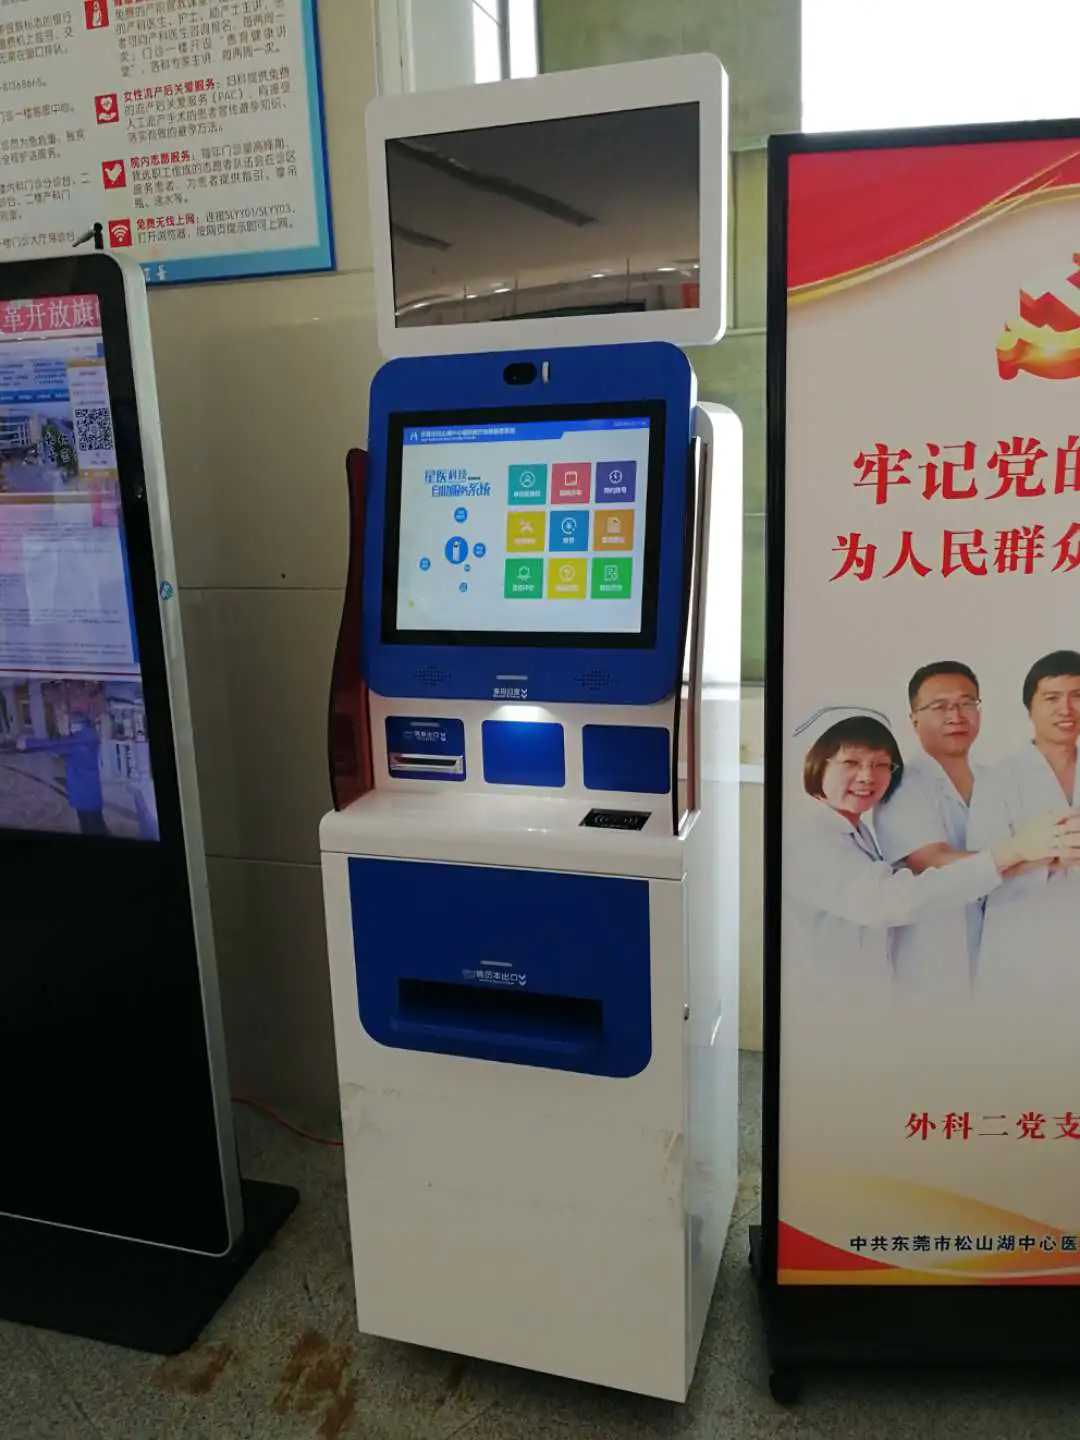 digital signage self service medical book applicating kiosk terminal for hospital patients with book dispensing